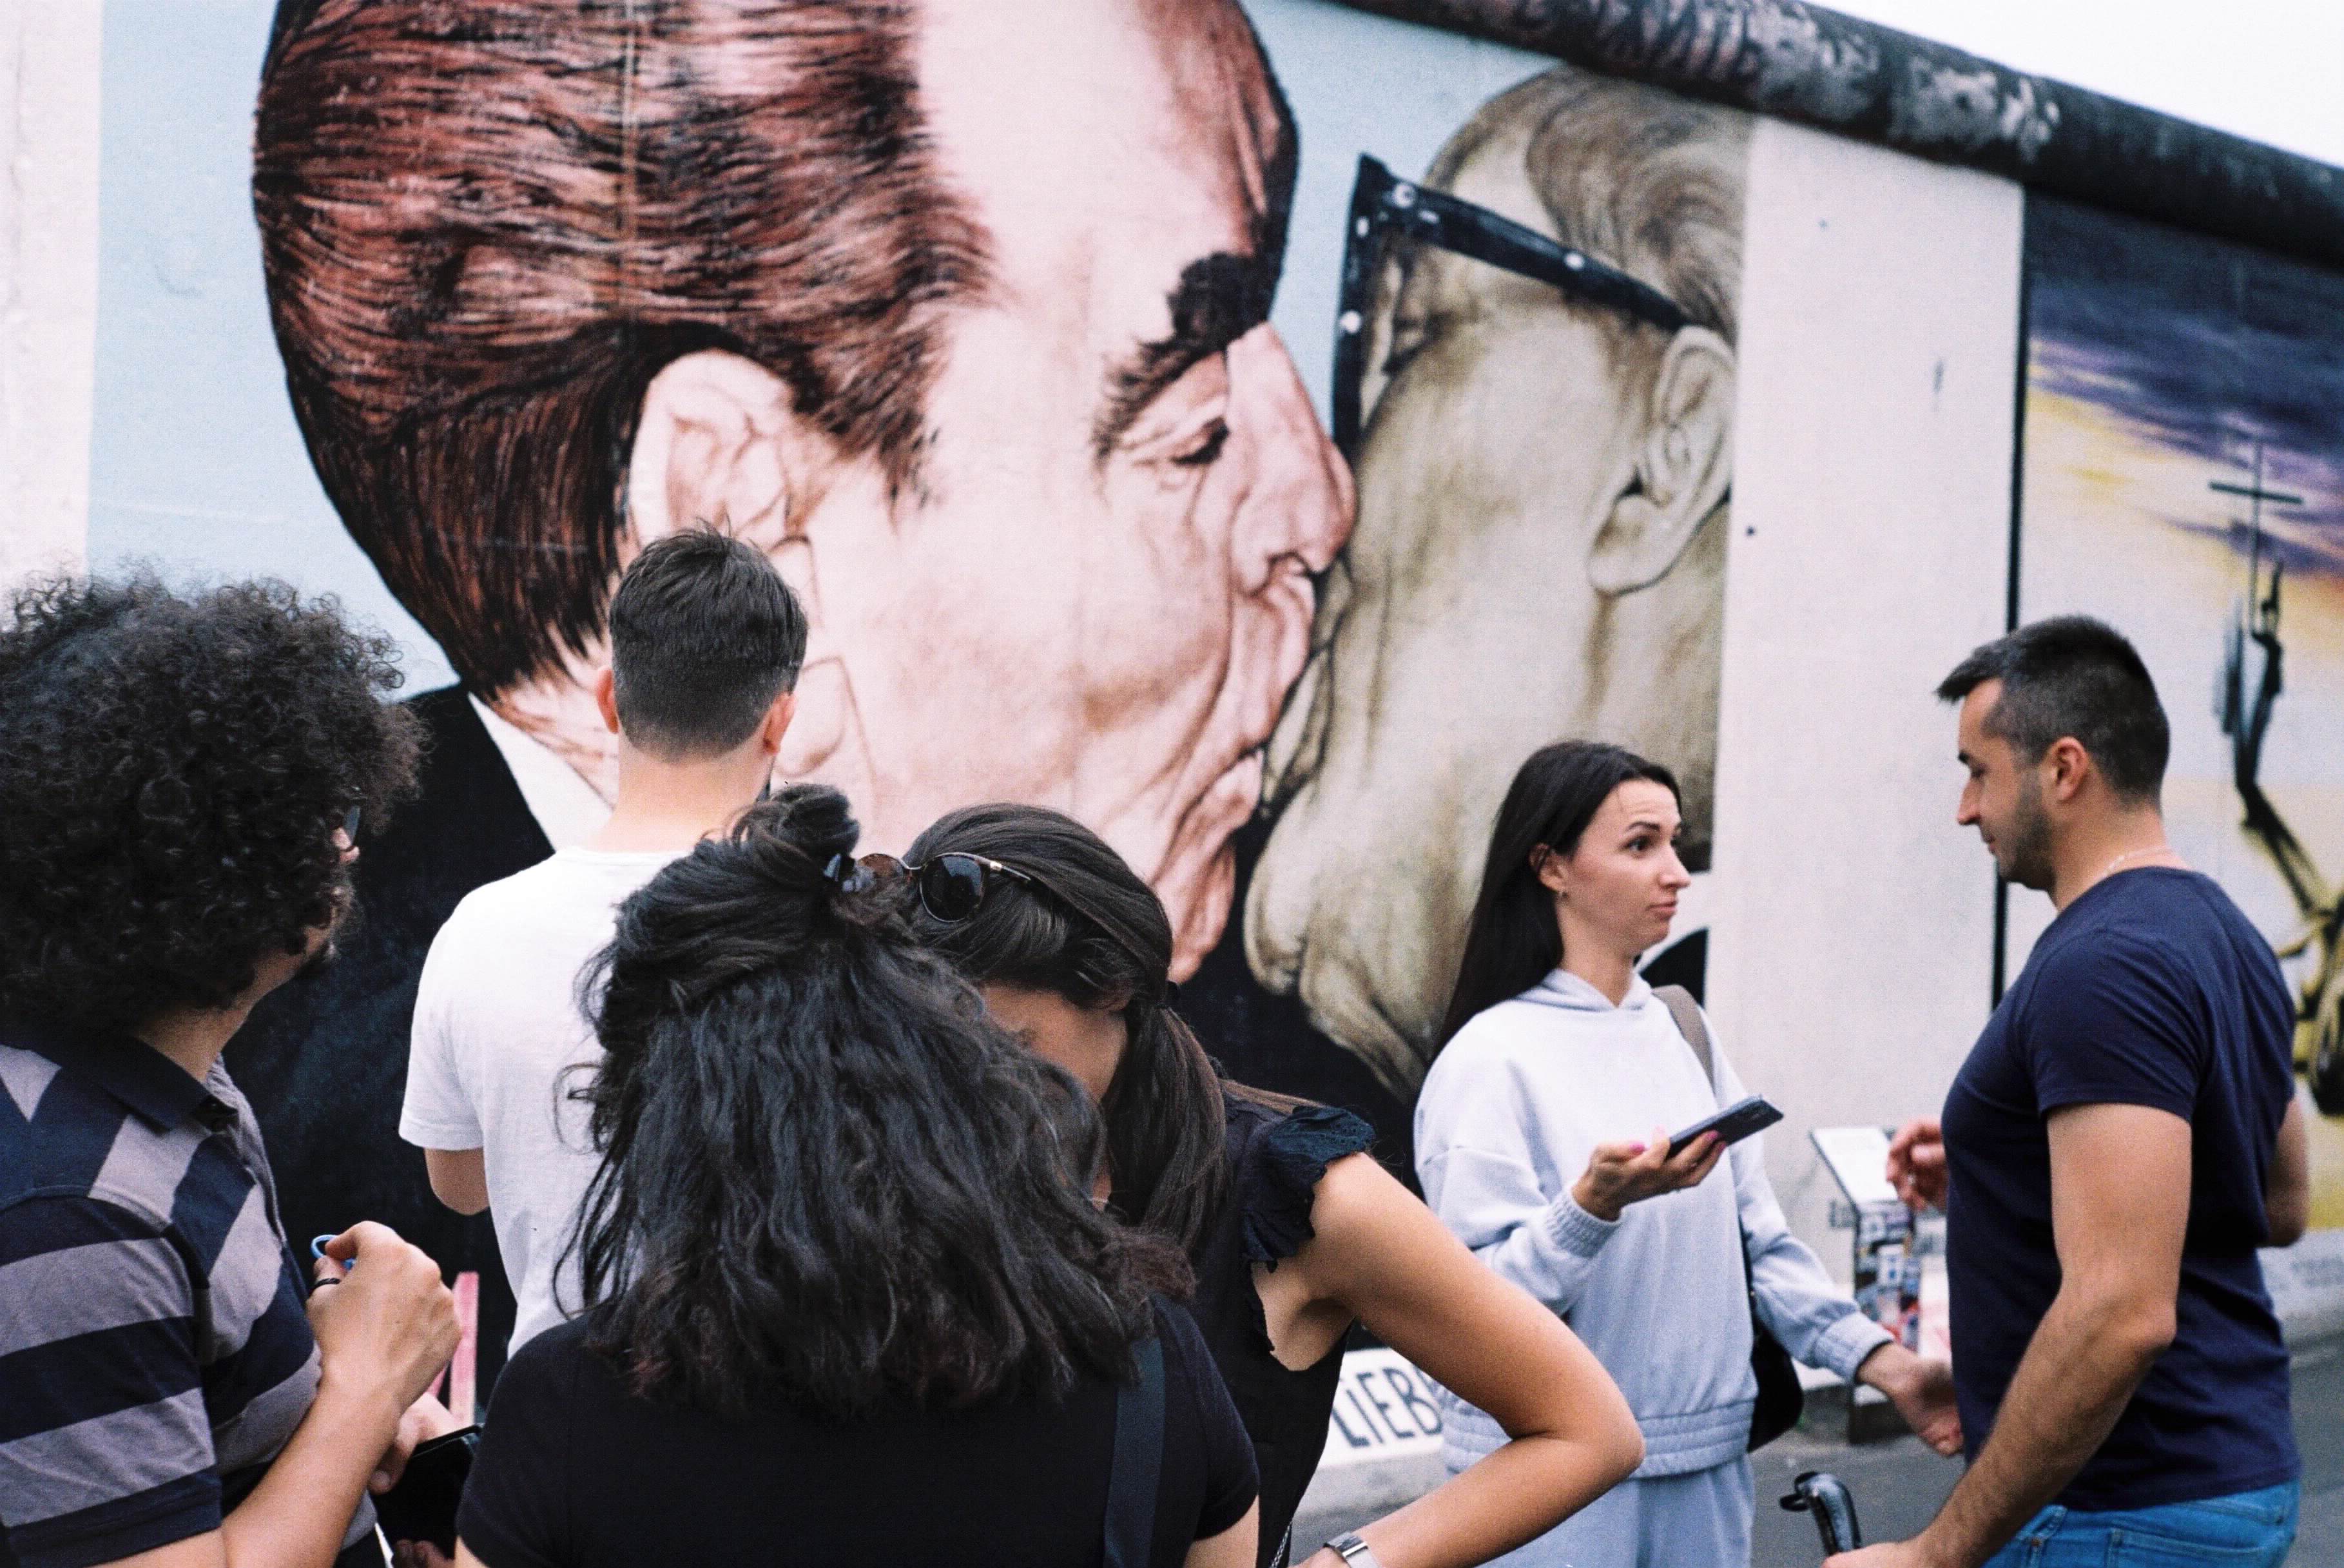 Tourists at the famous kissing mural on the berlin wall.